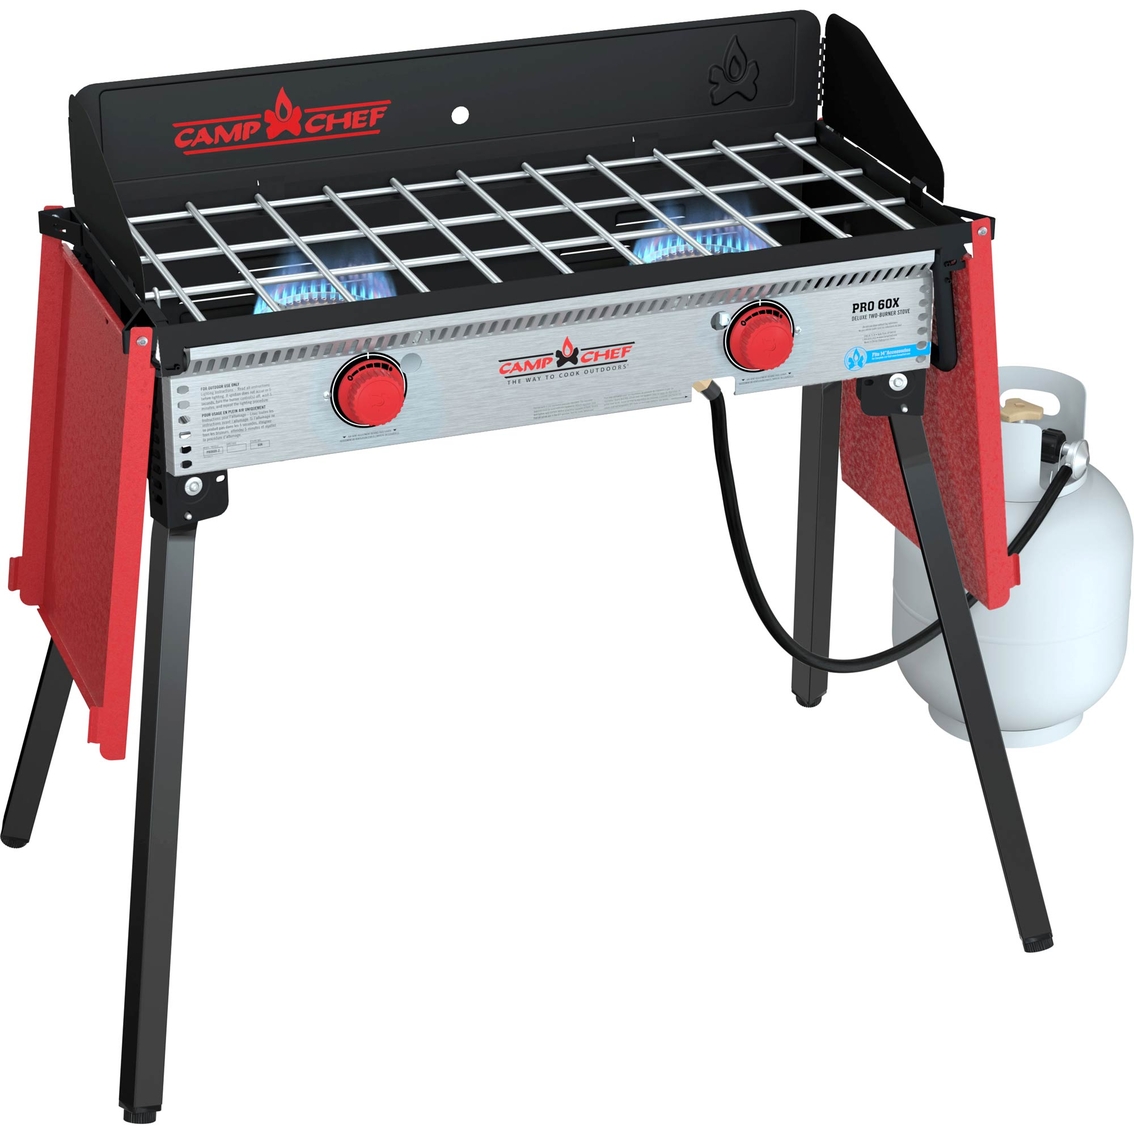 Camp Chef Pro 60X Two Burner Stove - Image 3 of 4